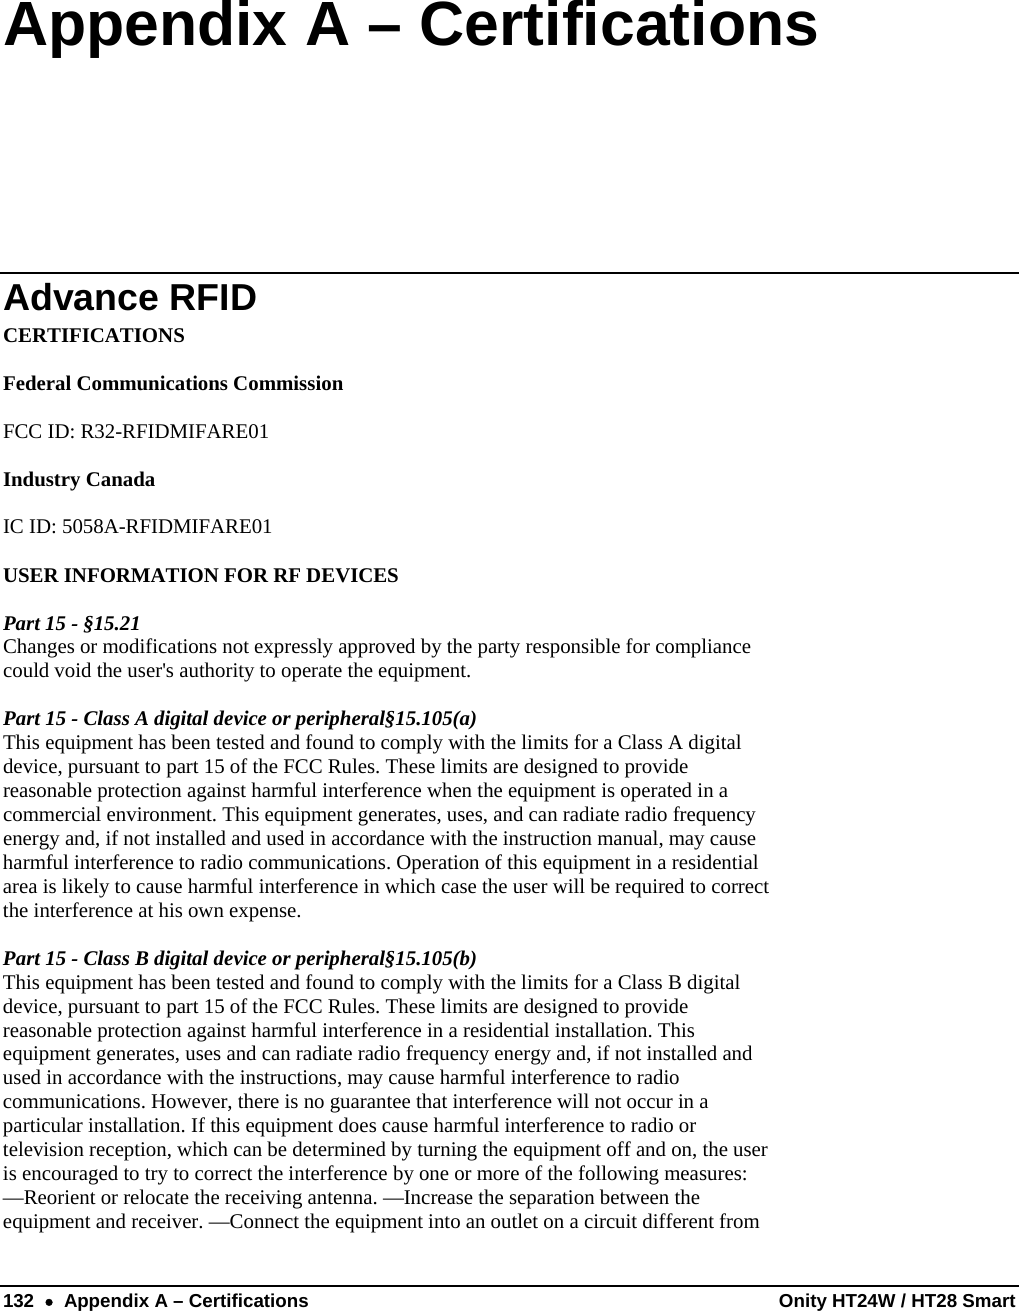  132  •  Appendix A – Certifications  Onity HT24W / HT28 Smart Appendix A – Certifications Advance RFID CERTIFICATIONS  Federal Communications Commission  FCC ID: R32-RFIDMIFARE01  Industry Canada  IC ID: 5058A-RFIDMIFARE01  USER INFORMATION FOR RF DEVICES  Part 15 - §15.21 Changes or modifications not expressly approved by the party responsible for compliance could void the user&apos;s authority to operate the equipment.  Part 15 - Class A digital device or peripheral§15.105(a) This equipment has been tested and found to comply with the limits for a Class A digital device, pursuant to part 15 of the FCC Rules. These limits are designed to provide reasonable protection against harmful interference when the equipment is operated in a commercial environment. This equipment generates, uses, and can radiate radio frequency energy and, if not installed and used in accordance with the instruction manual, may cause harmful interference to radio communications. Operation of this equipment in a residential area is likely to cause harmful interference in which case the user will be required to correct the interference at his own expense.  Part 15 - Class B digital device or peripheral§15.105(b) This equipment has been tested and found to comply with the limits for a Class B digital device, pursuant to part 15 of the FCC Rules. These limits are designed to provide reasonable protection against harmful interference in a residential installation. This equipment generates, uses and can radiate radio frequency energy and, if not installed and used in accordance with the instructions, may cause harmful interference to radio communications. However, there is no guarantee that interference will not occur in a particular installation. If this equipment does cause harmful interference to radio or television reception, which can be determined by turning the equipment off and on, the user is encouraged to try to correct the interference by one or more of the following measures: —Reorient or relocate the receiving antenna. —Increase the separation between the equipment and receiver. —Connect the equipment into an outlet on a circuit different from 